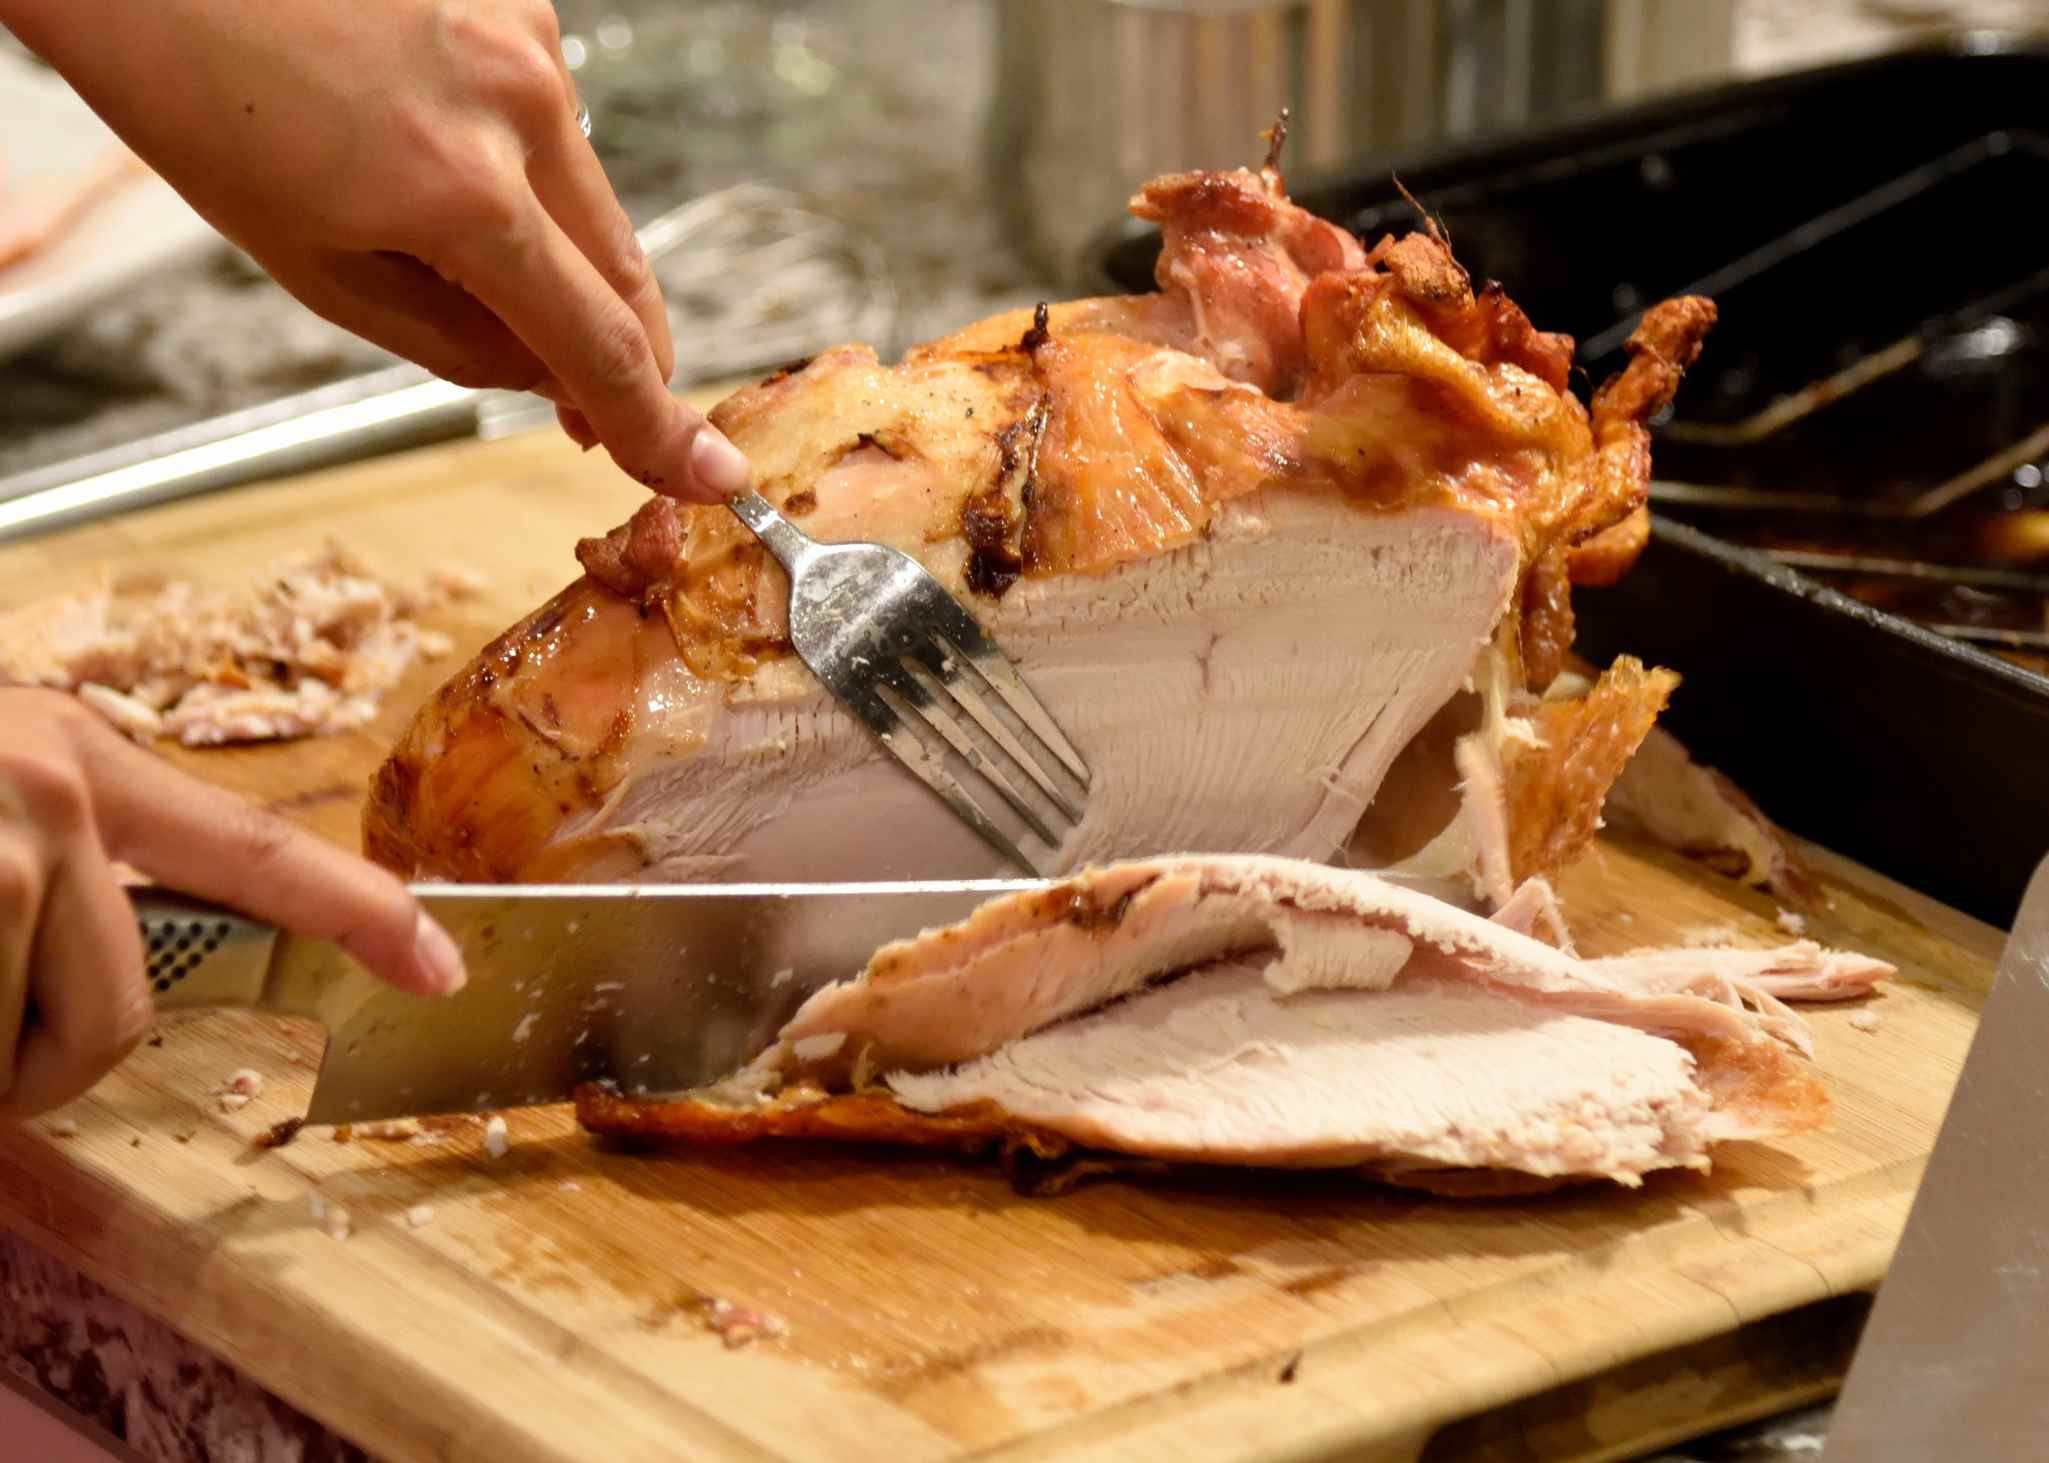 Buy A Cooked Turkey For Thanksgiving
 The 10 Best Mail Order Turkeys of 2019